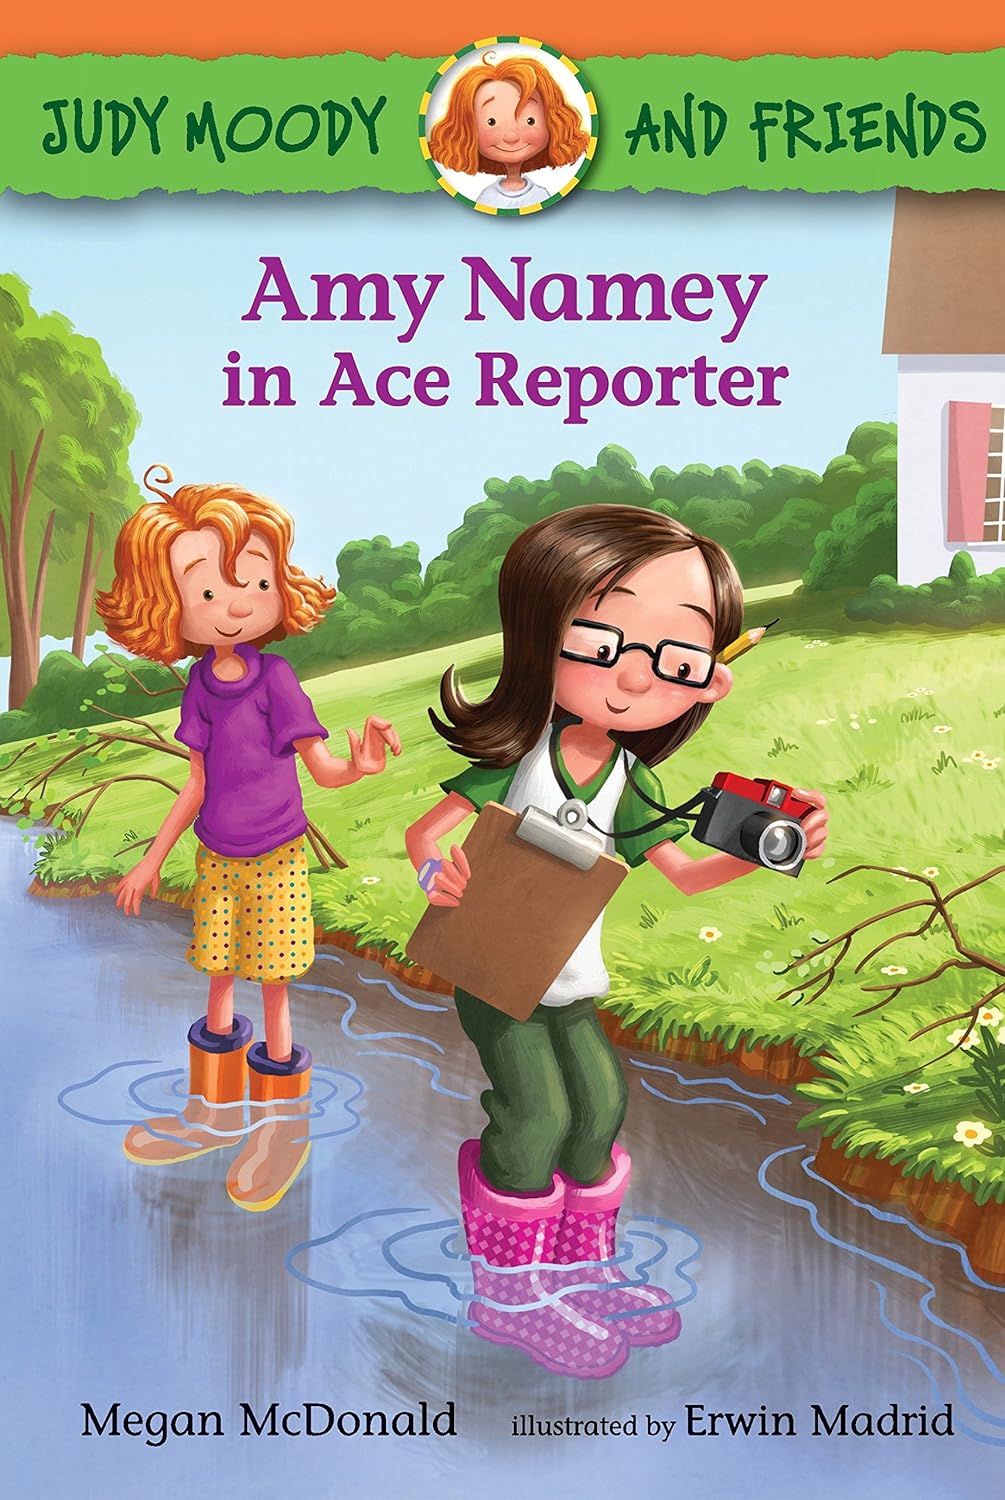 Judy Moody And Friends # 3 : Amy Namey in Ace Reporter - Megan McDonald